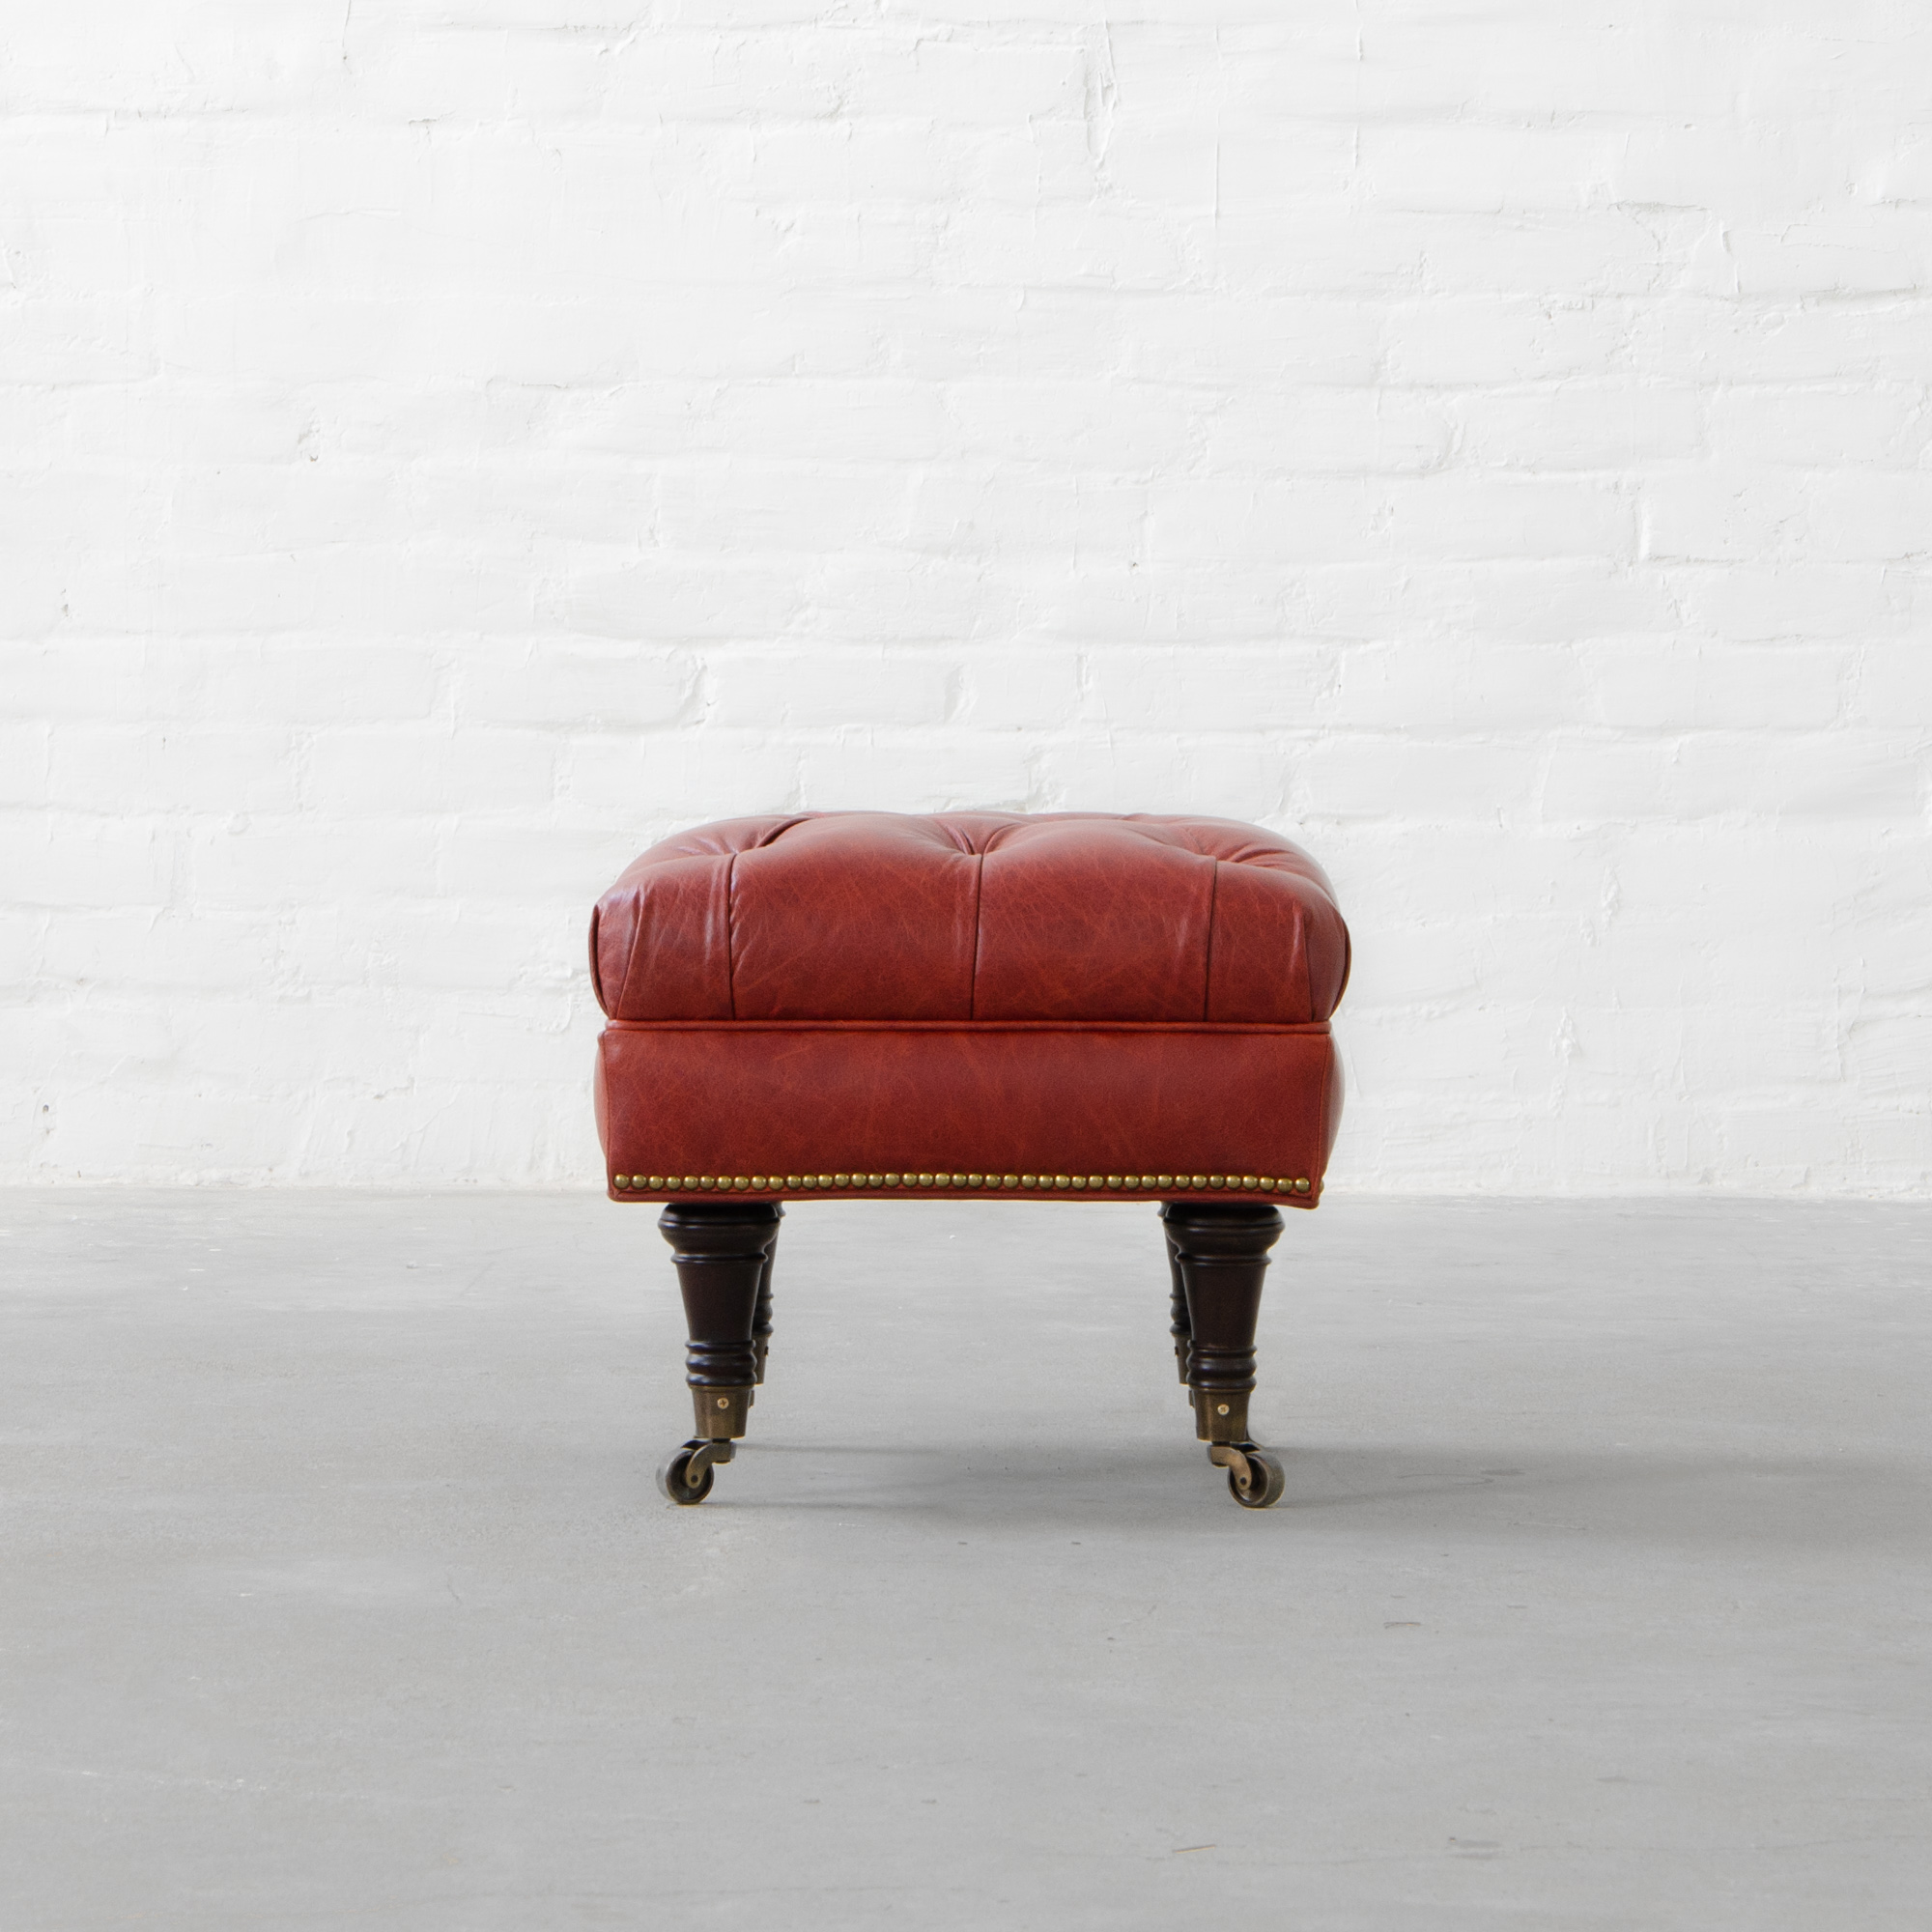 Ryan Upholstered Leather Ottoman, Red Leather Ottoman